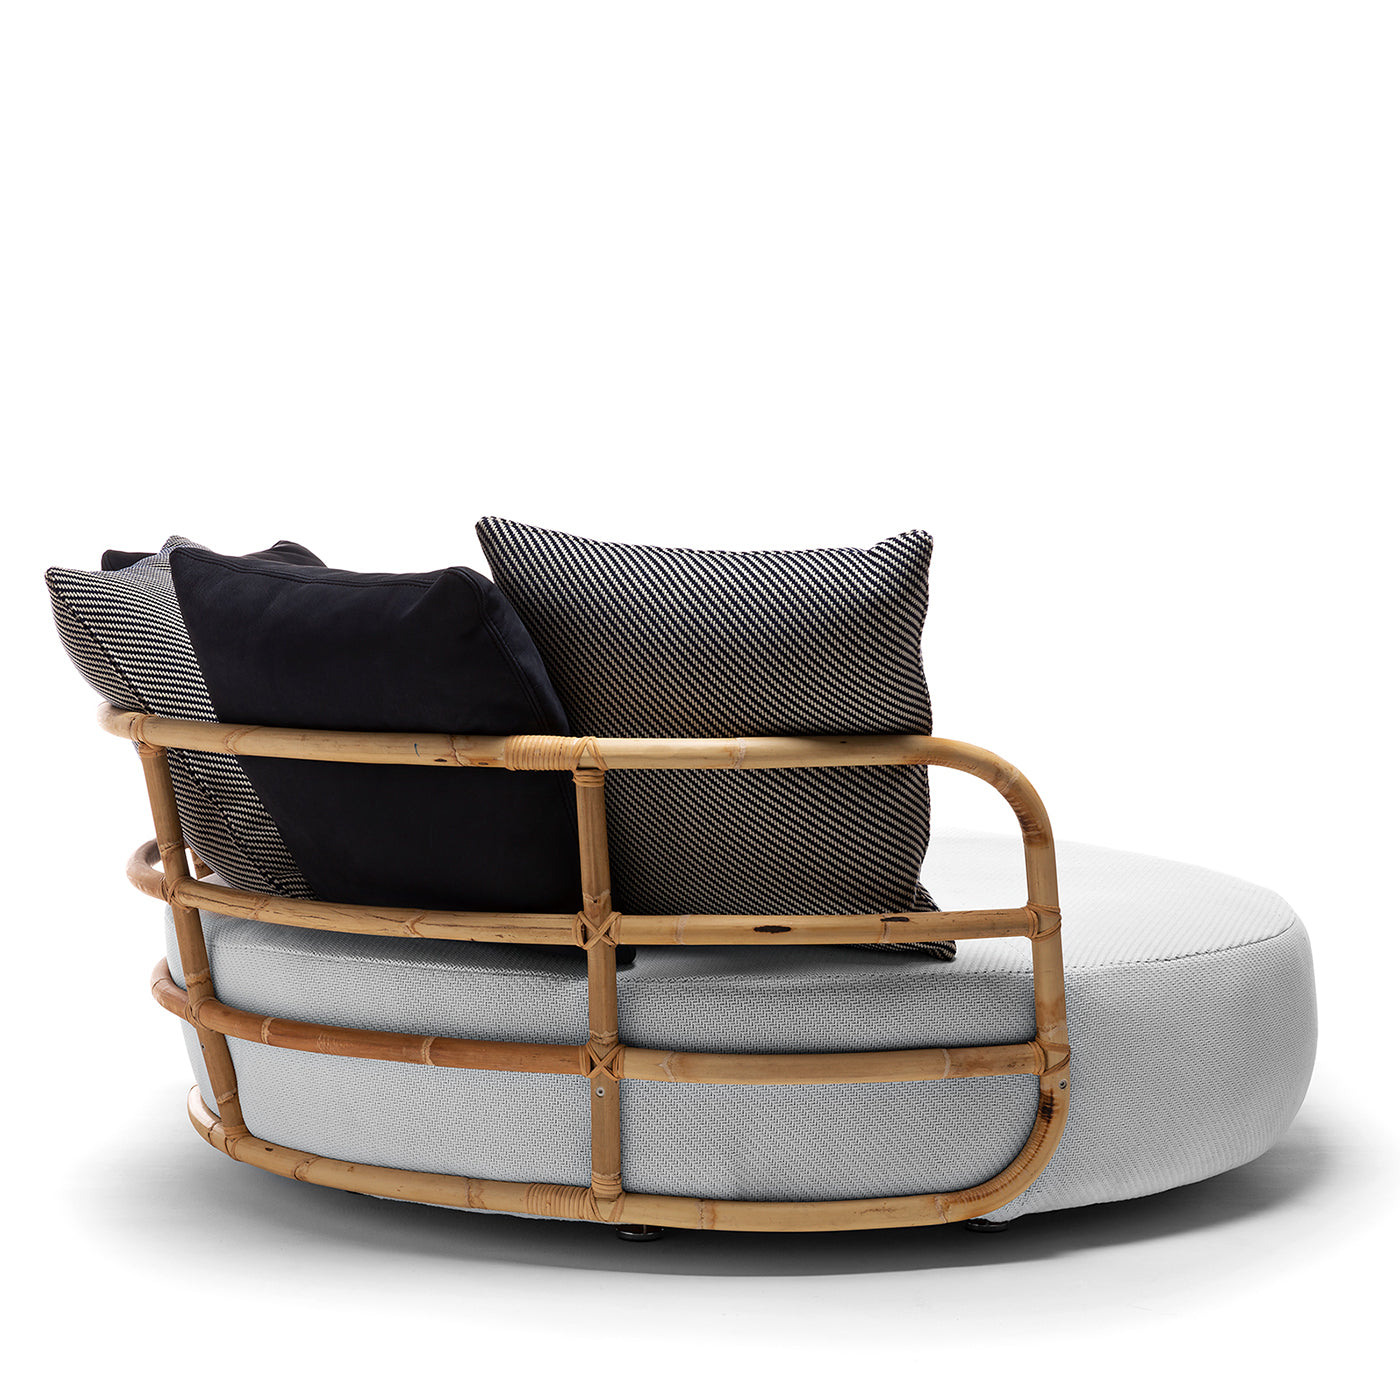 Jungle Daybed by Massimo Castagna - Alternative view 5